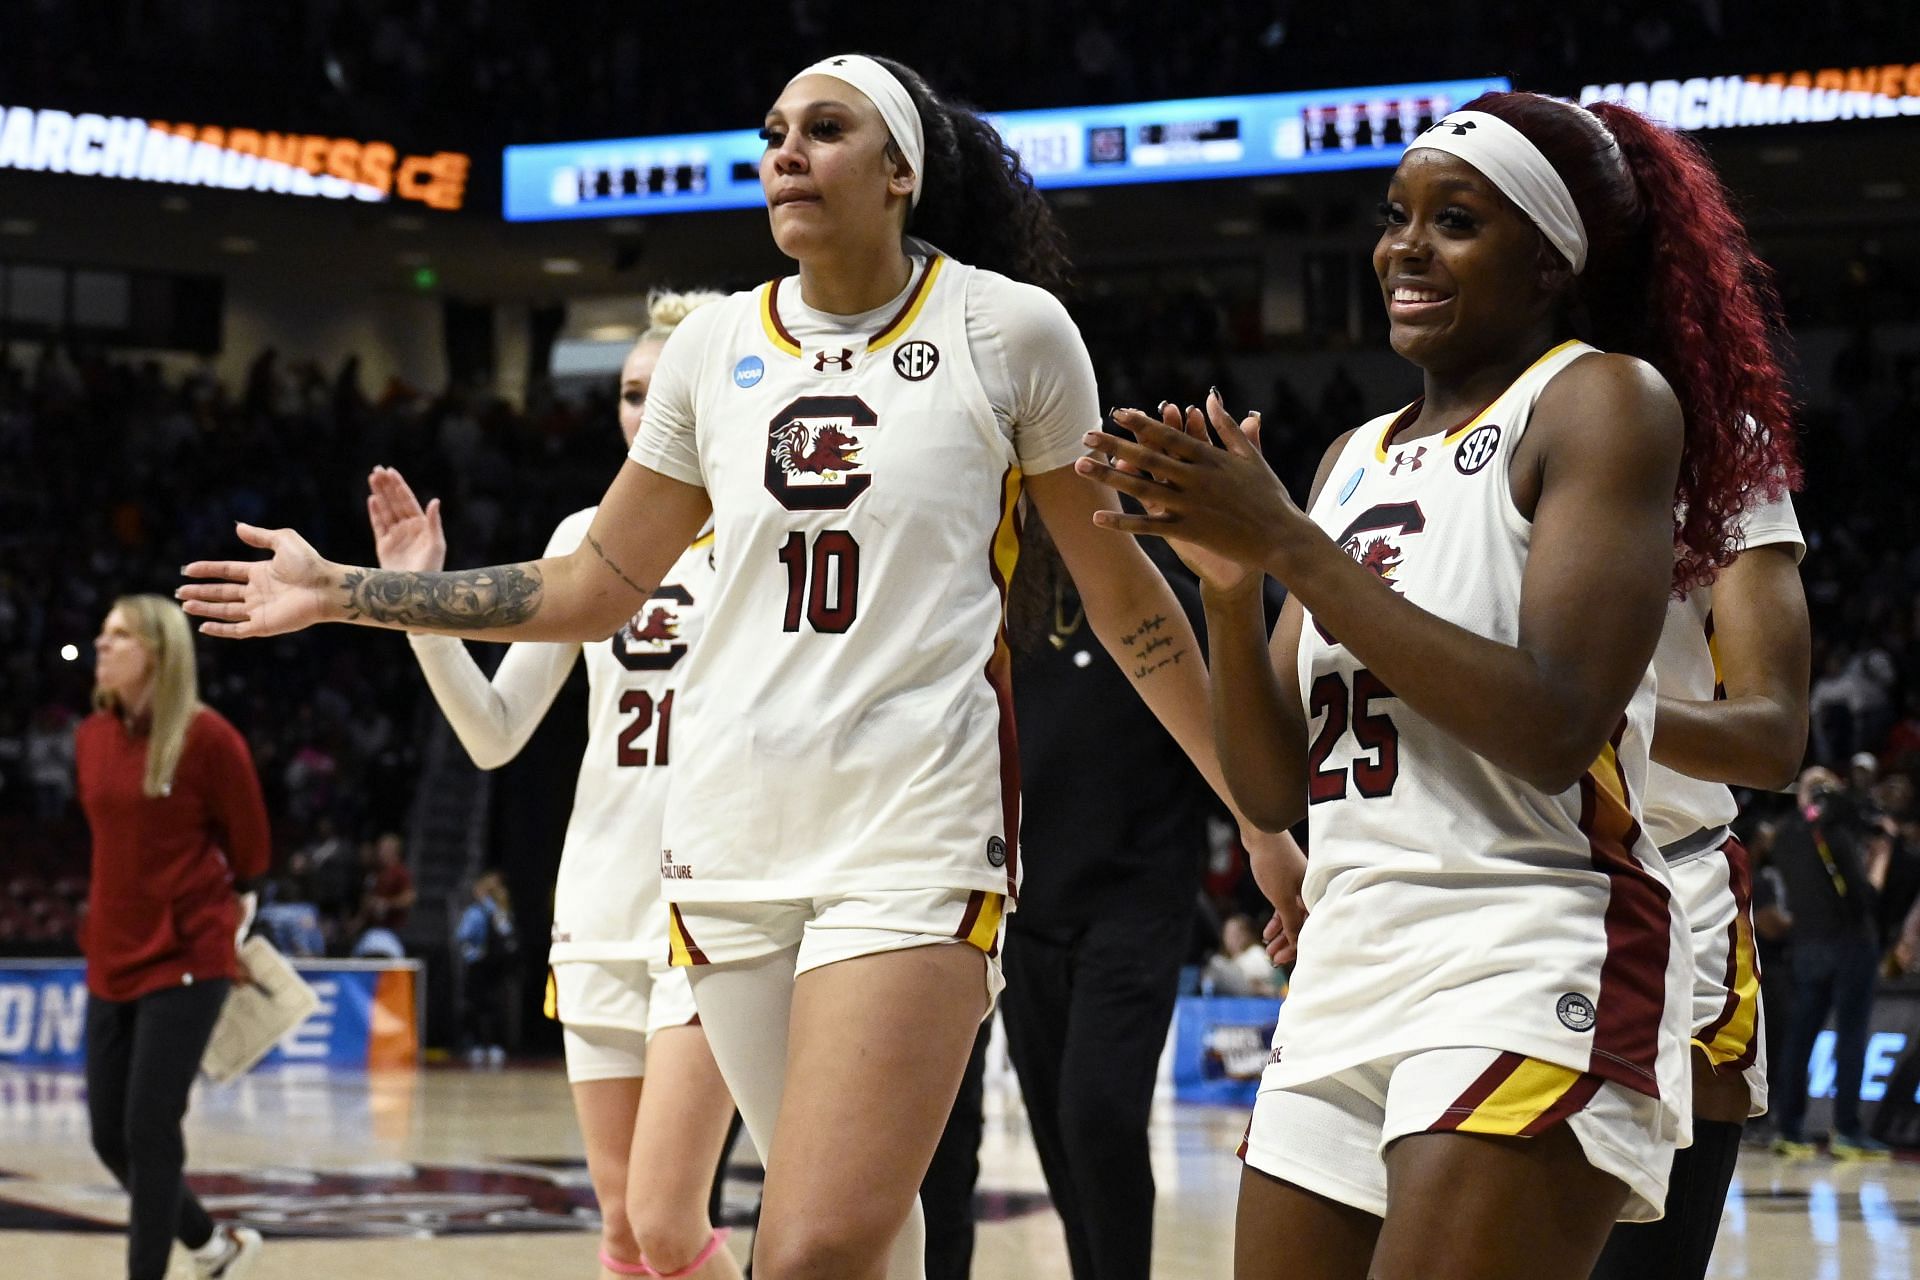 South Carolina has dominated the SEC and perhaps kept Angel Reese from the Naismith Award finalist list.